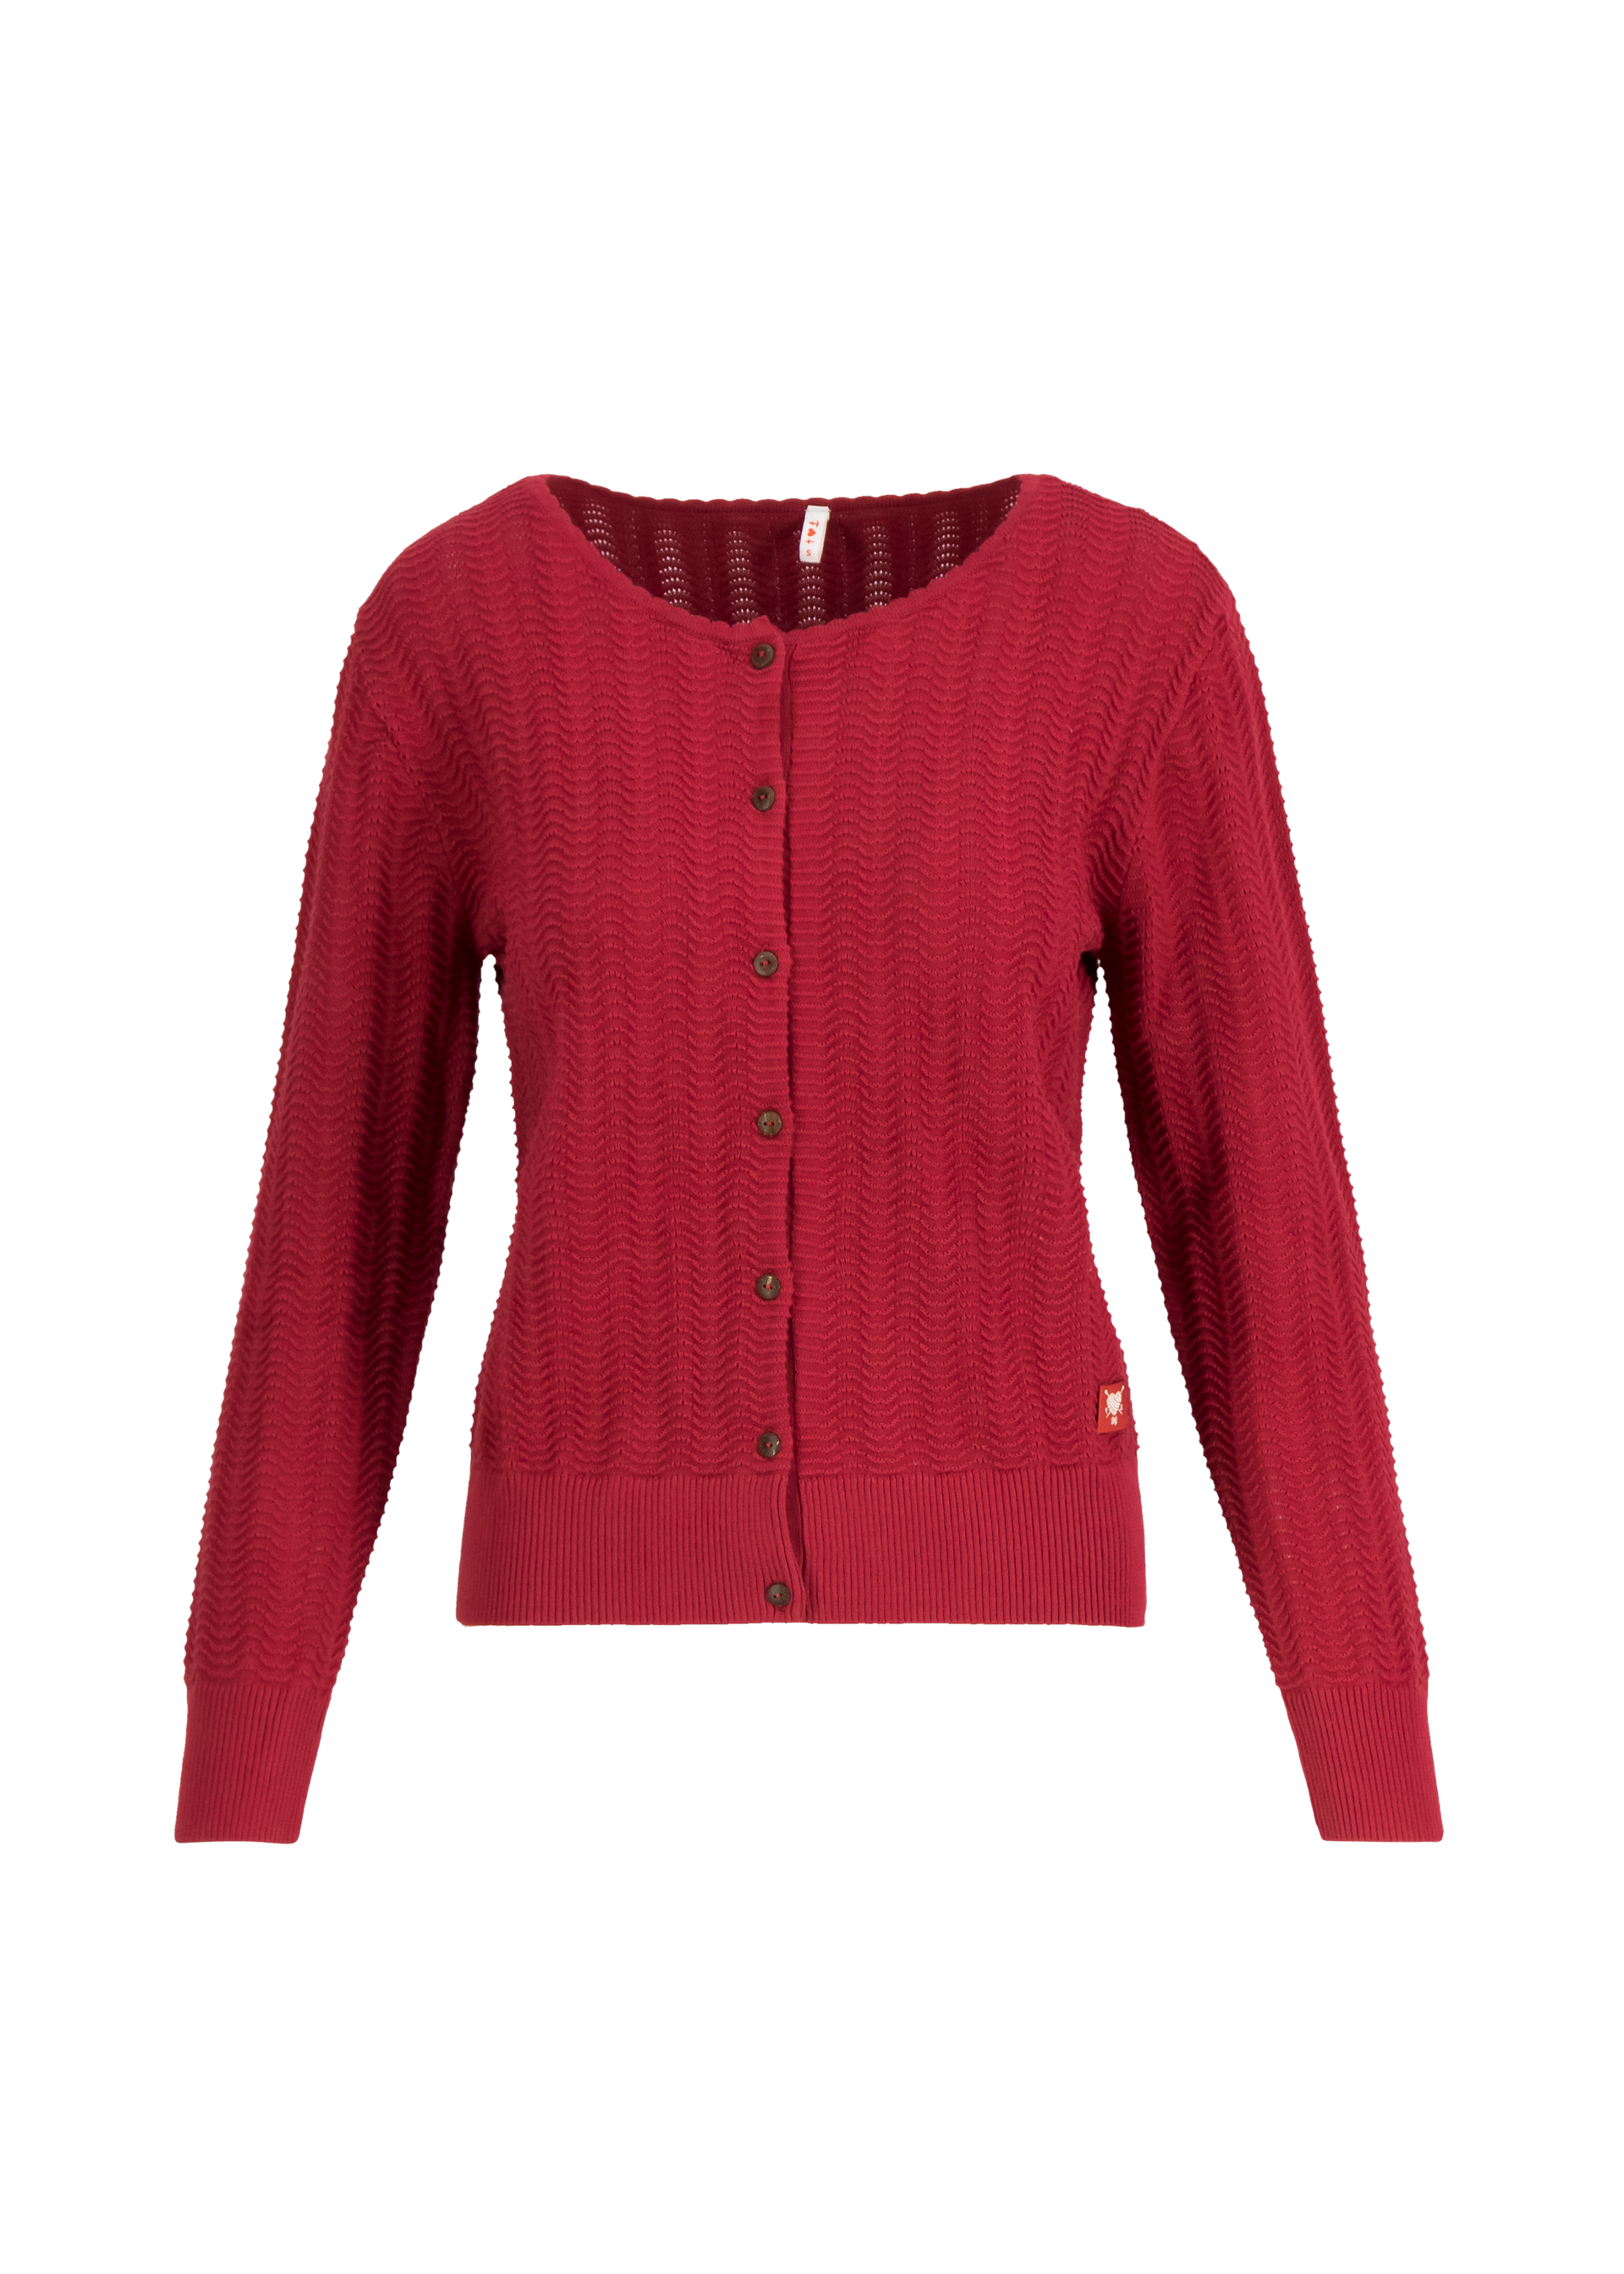 Cardigan Save the Brave Wave - red lively wave